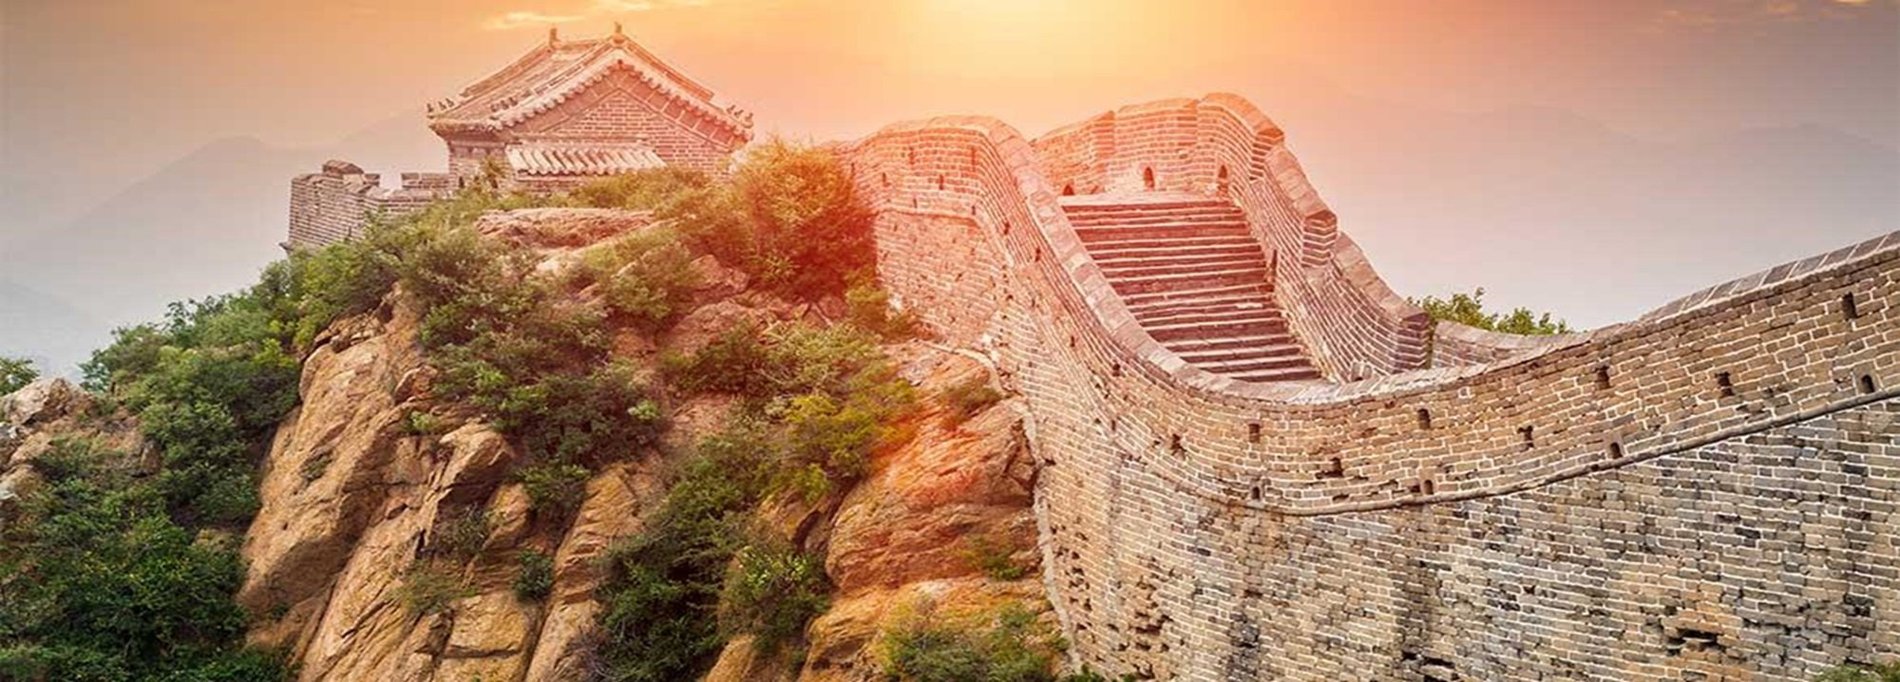 10 Things to Do in Beijing